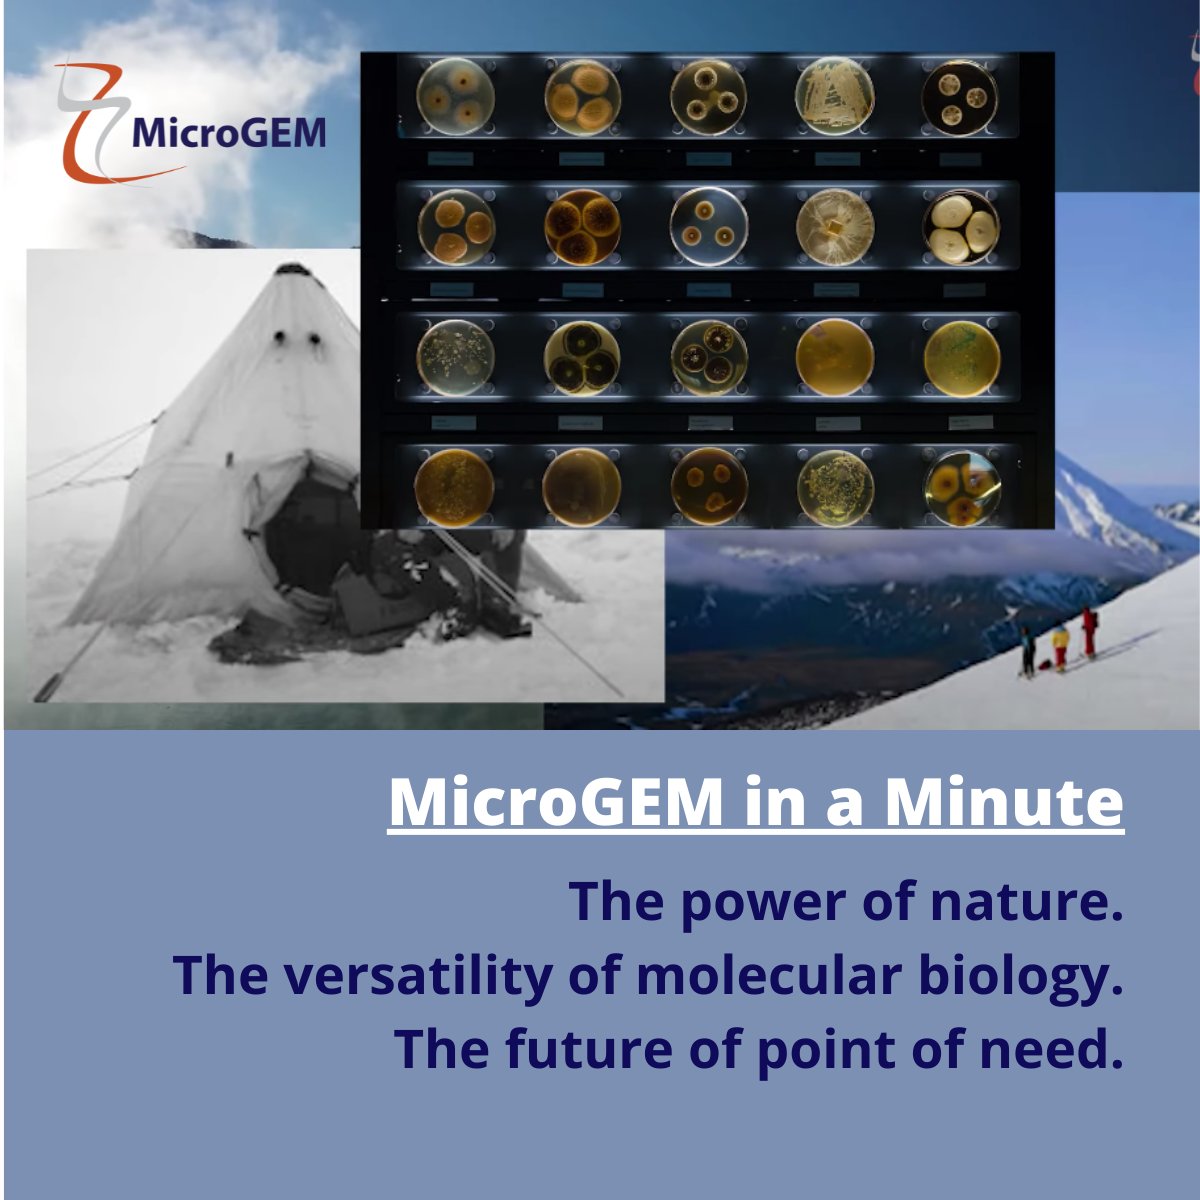 Innovation, technology, and drive. These are MicroGEM's ingredients to transform the power of molecular biology into point of need solutions for a future of wellness. It's all captured in our 1-minute video. Please view, like, and enjoy. youtube.com/watch?v=ZGrvP5… #DNA #RNA #PCR